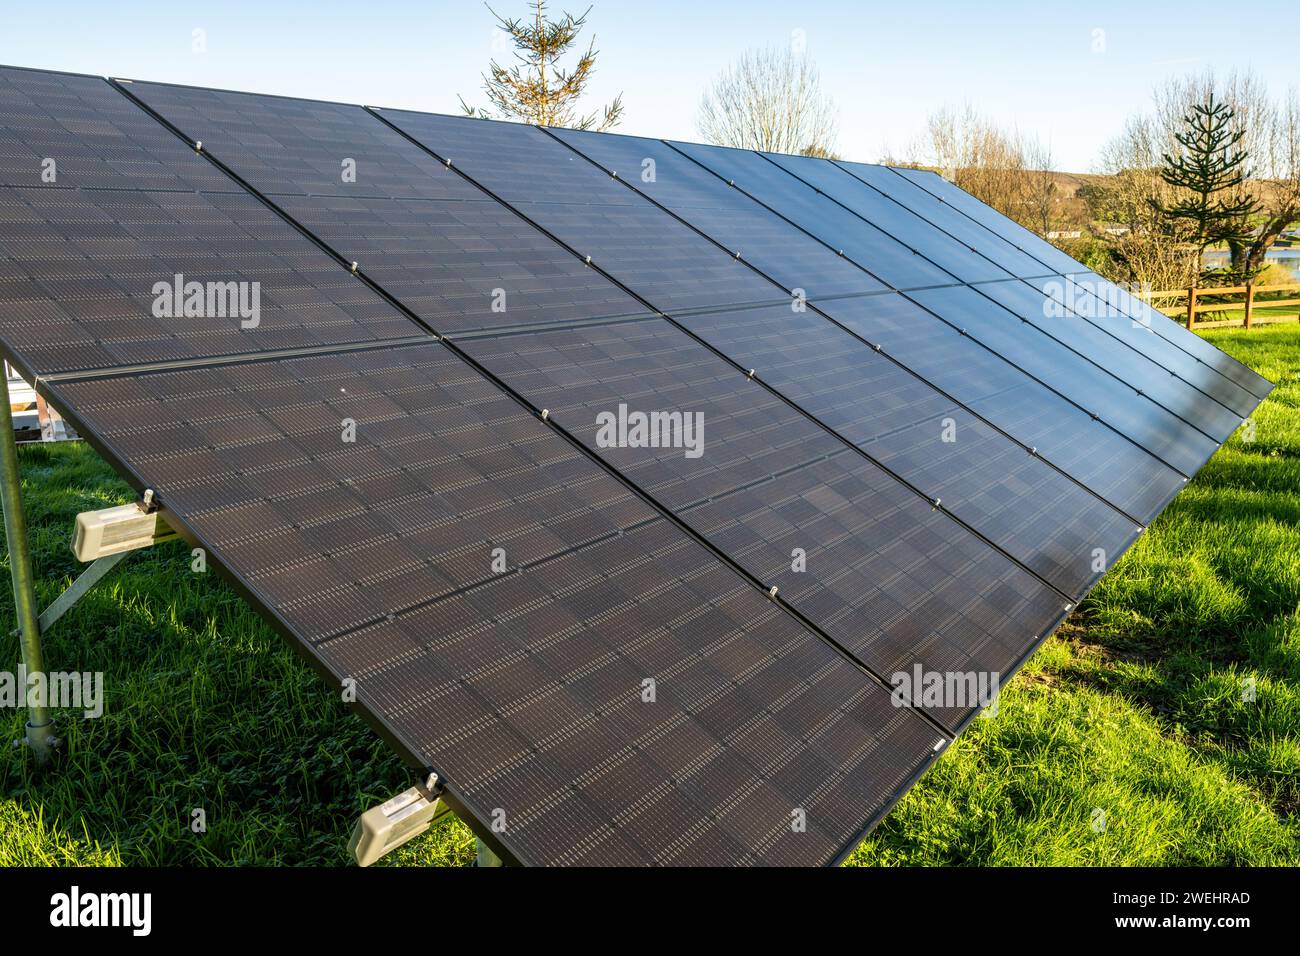 Bank of 16 solar panels on a domestic property in West Cork, Ireland. Stock Photo